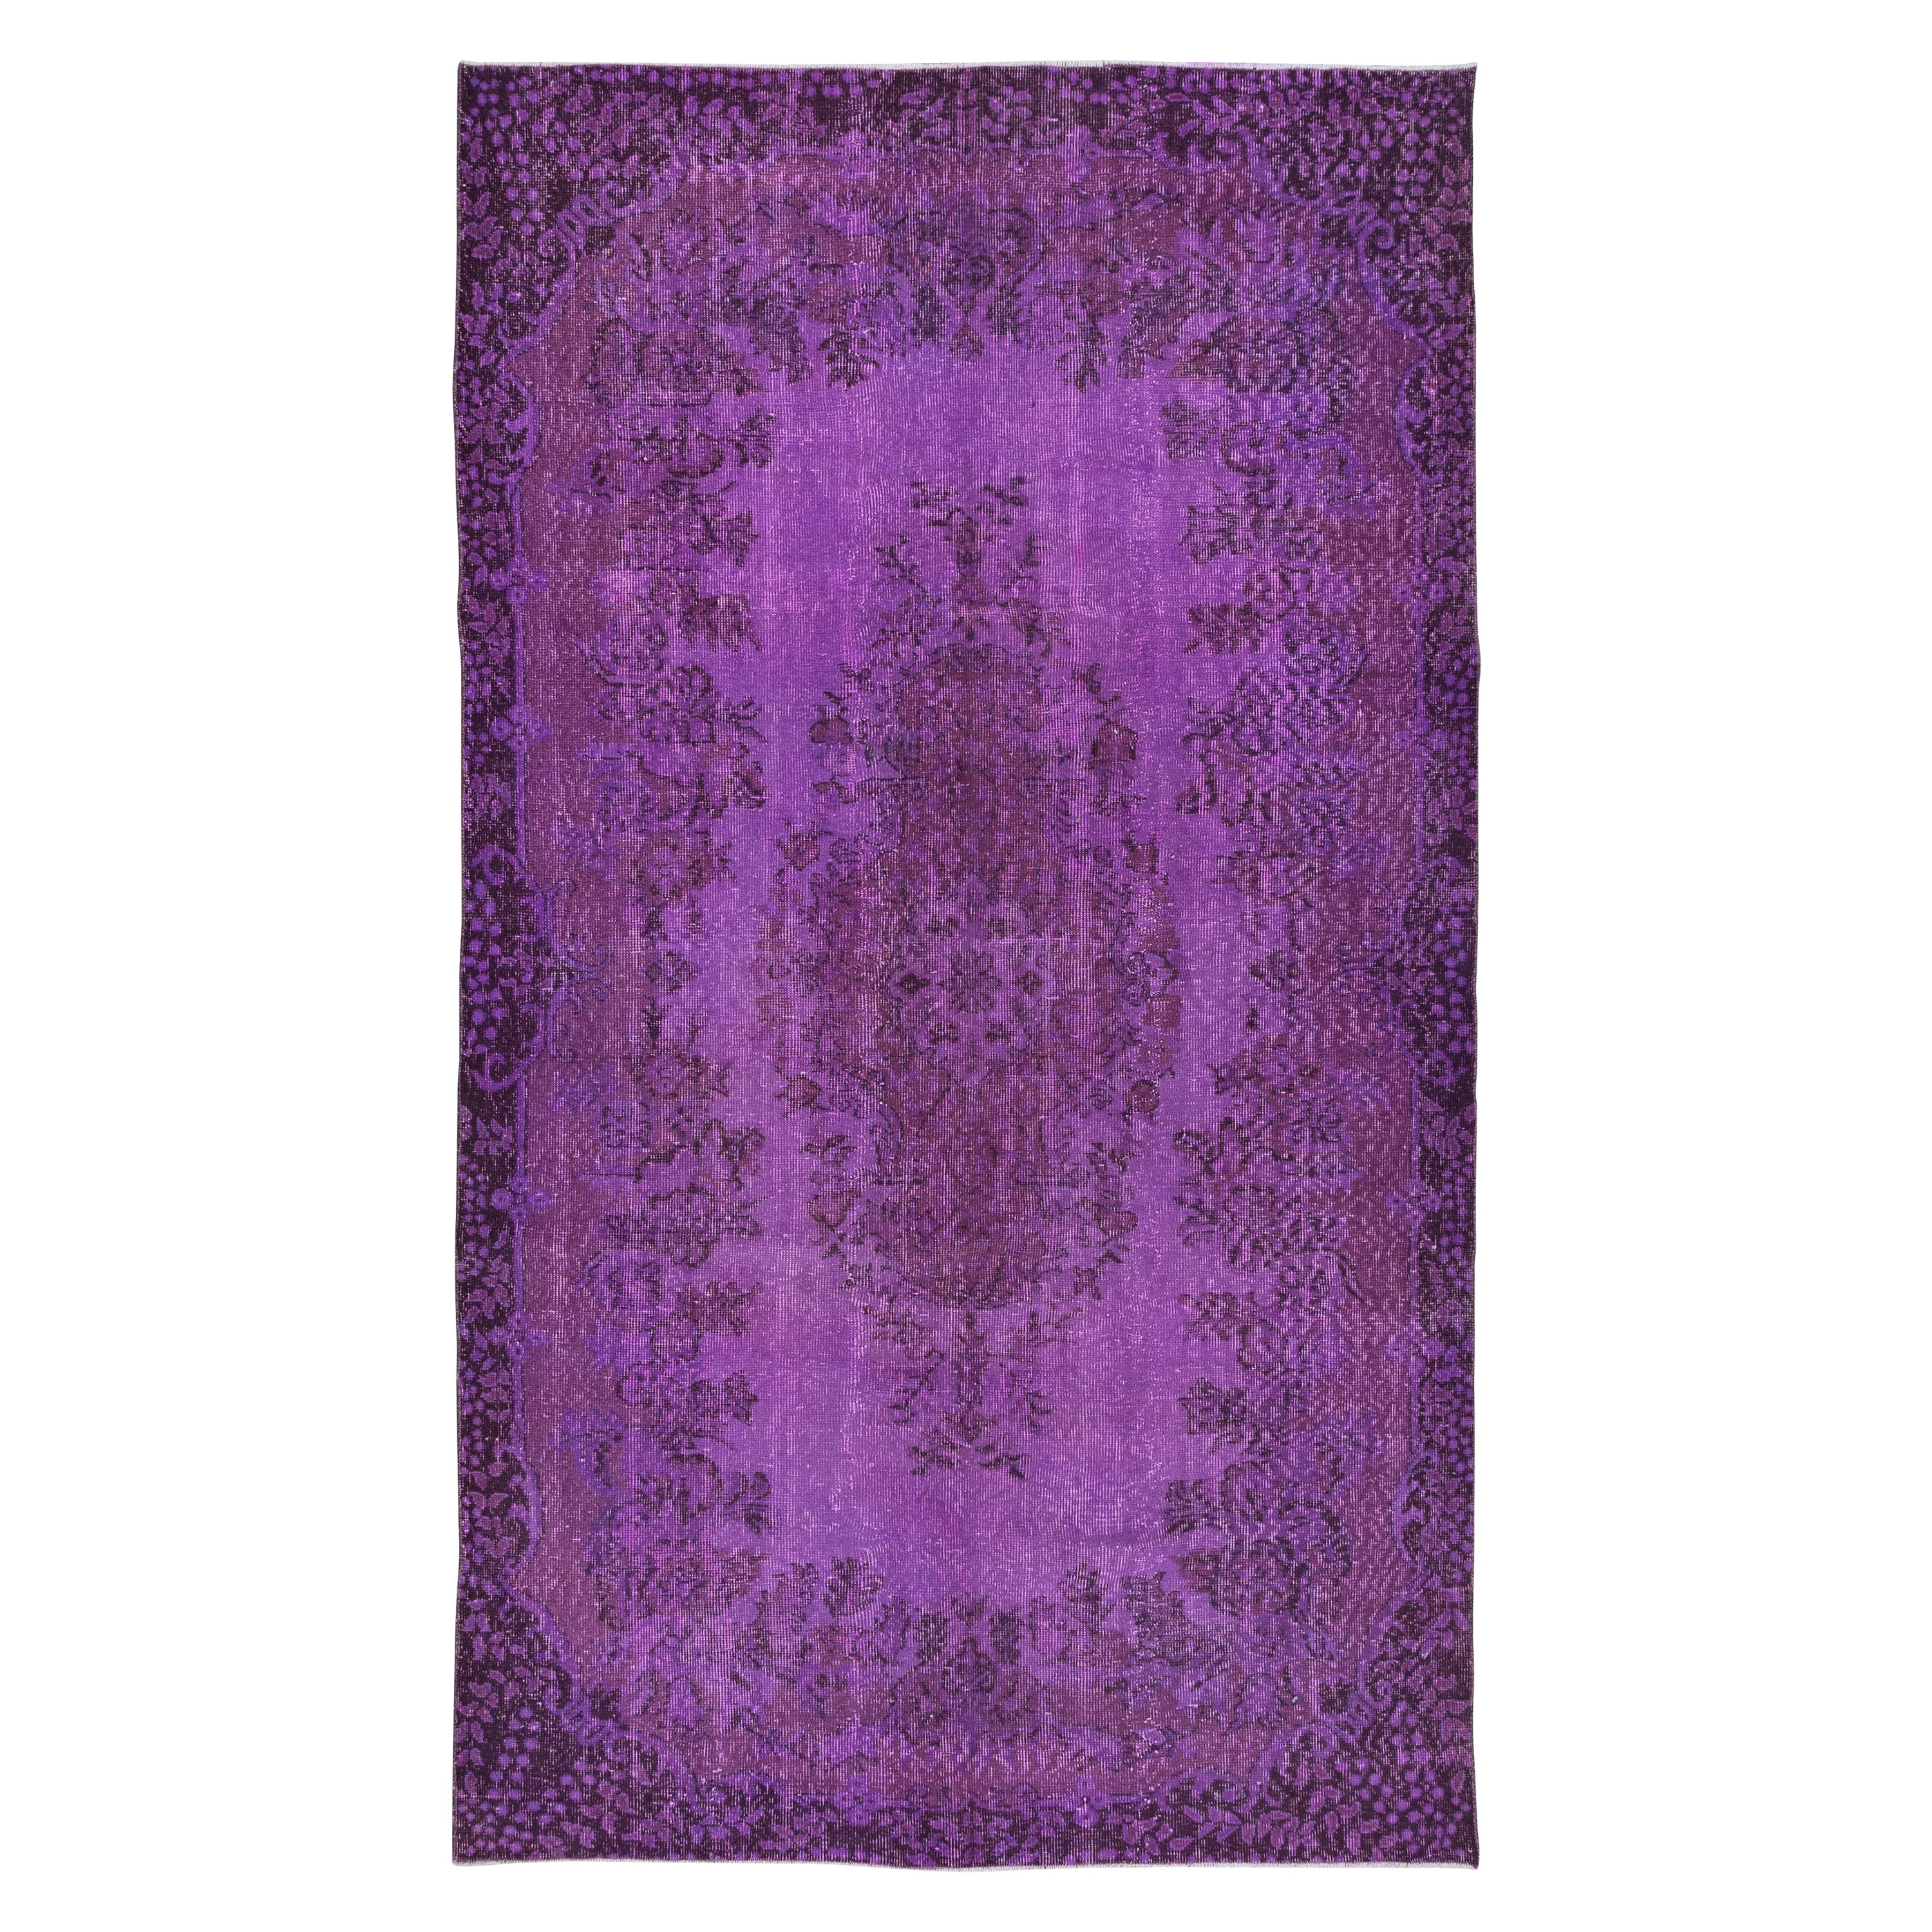 5.7x10 Ft Handmade Turkish Sparta Area Rug in Purple, Ideal for Modern Interiors For Sale